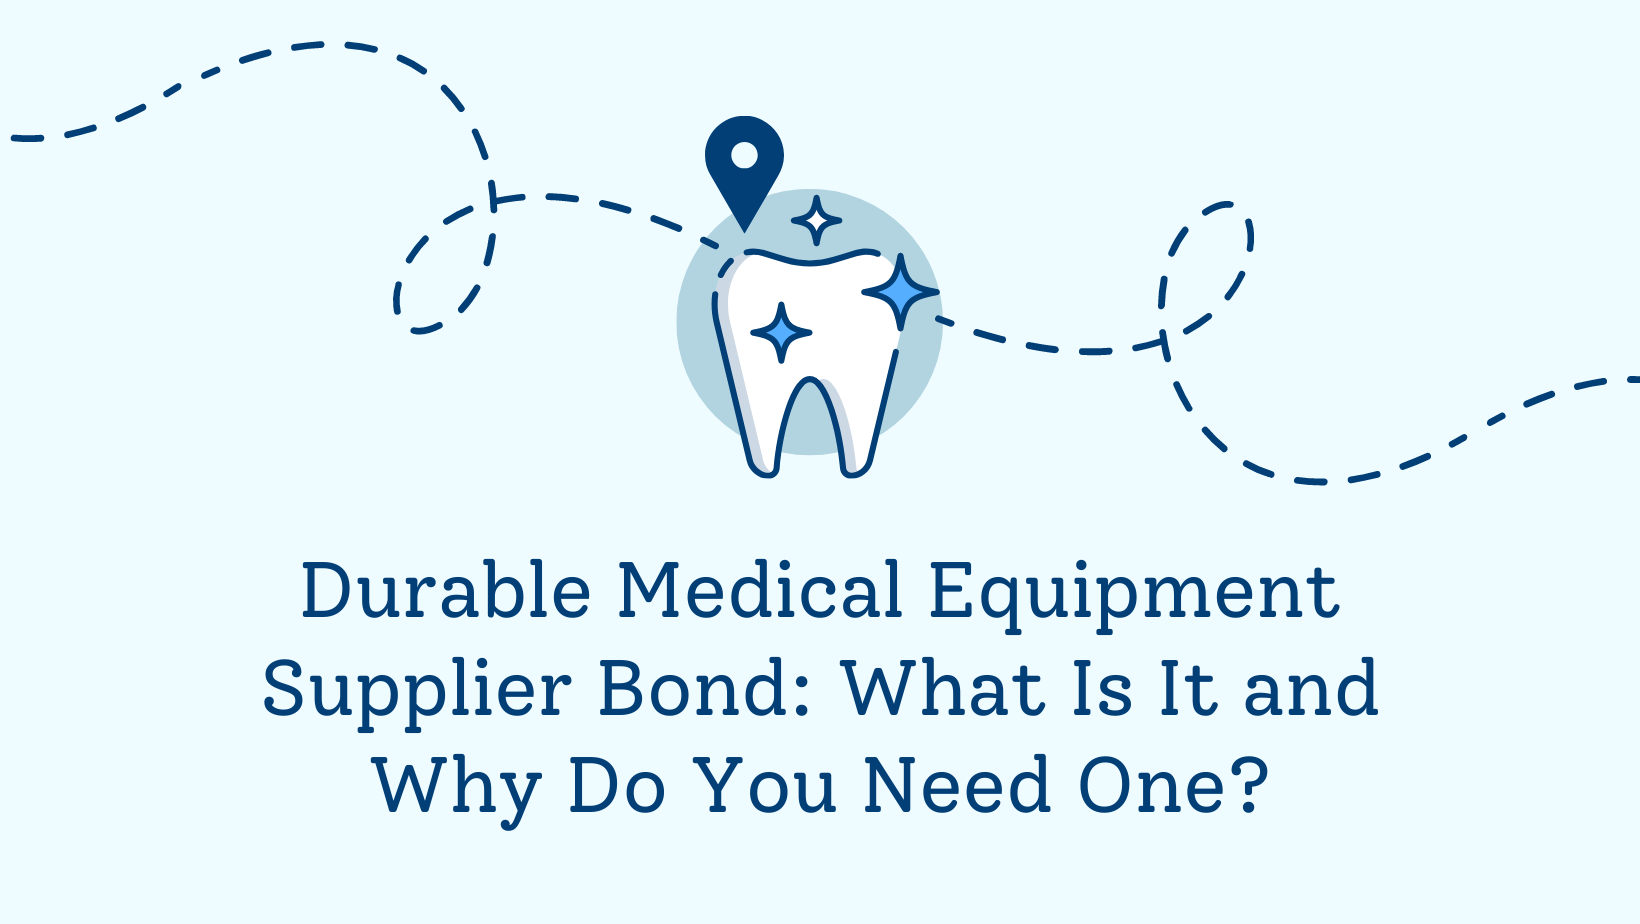 surety bond - What is a Durable Medical Equipment Suppliers Bond - teeth image in blue bg